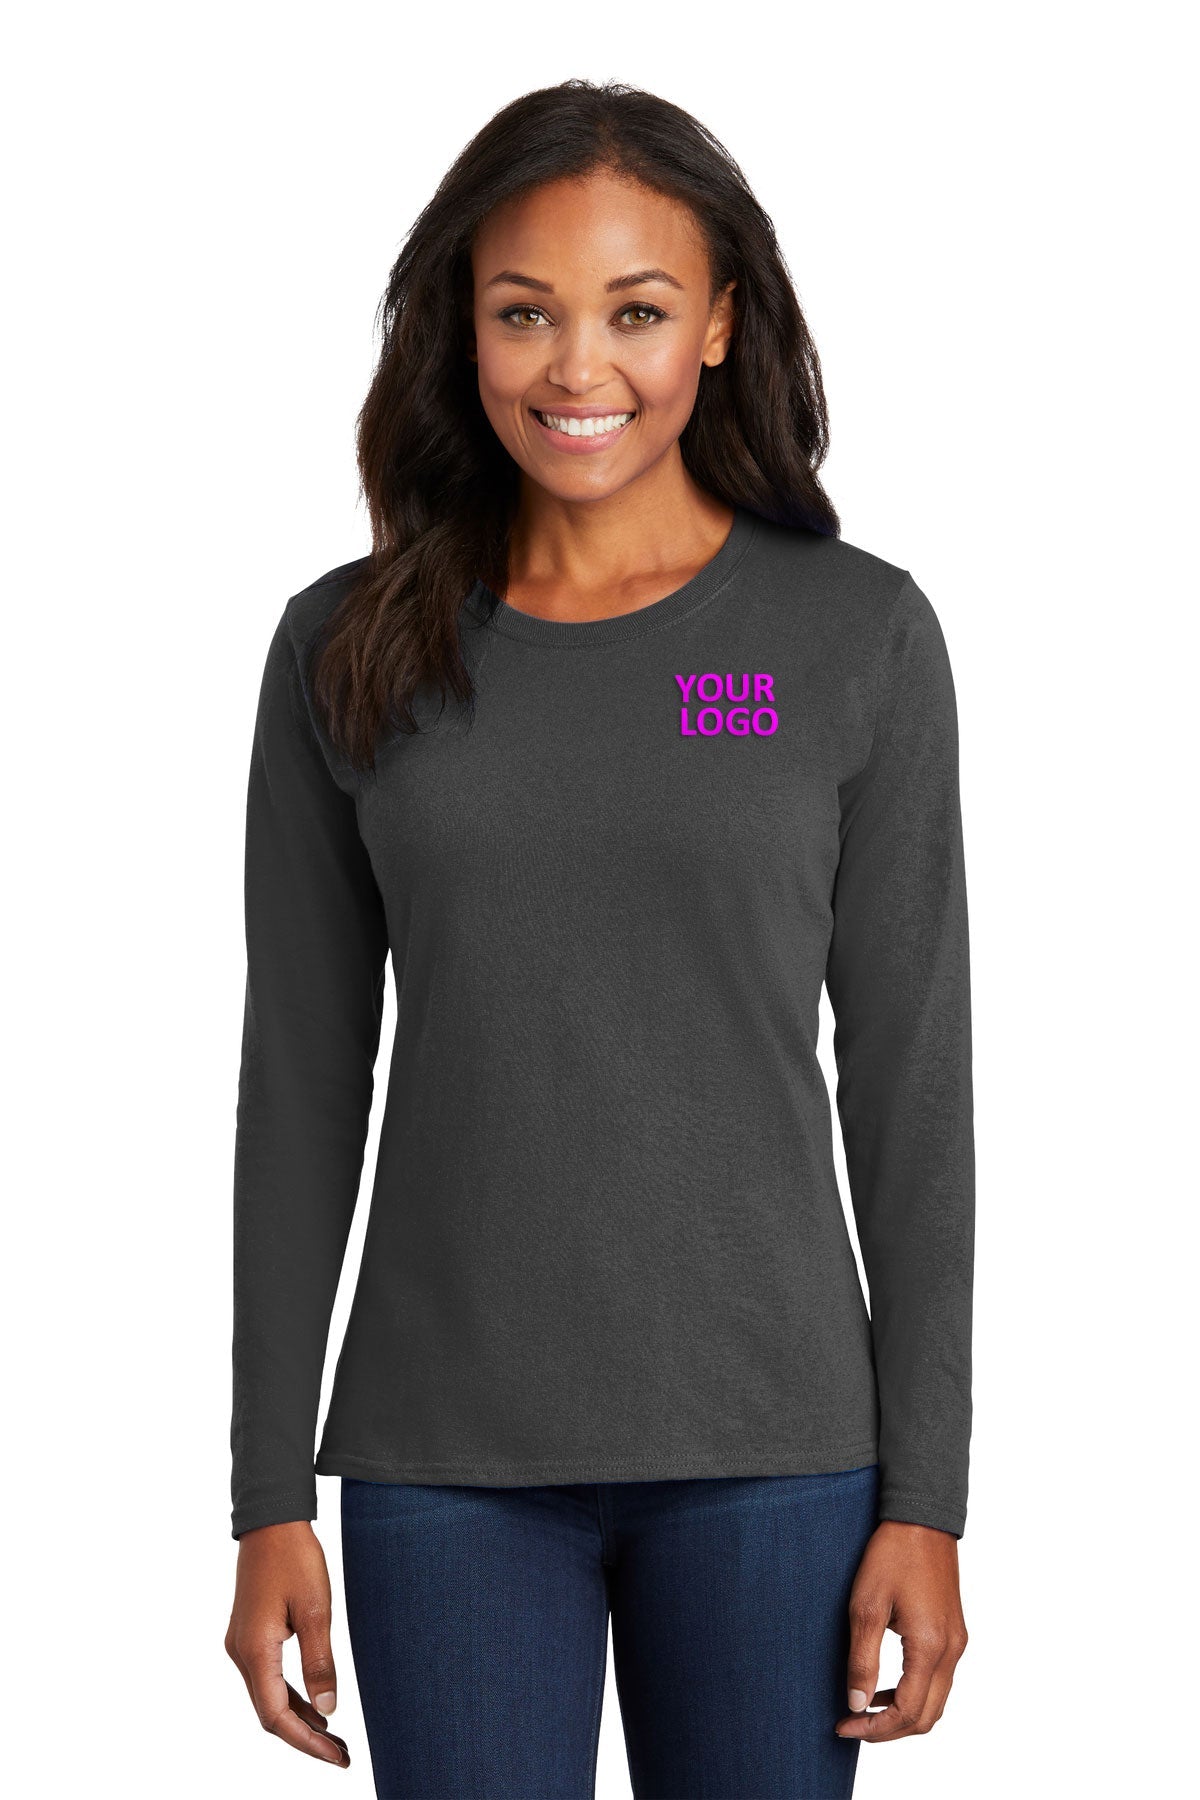 Port & Company Ladies Long Sleeve Branded Core Cotton Tee's, Charcoal